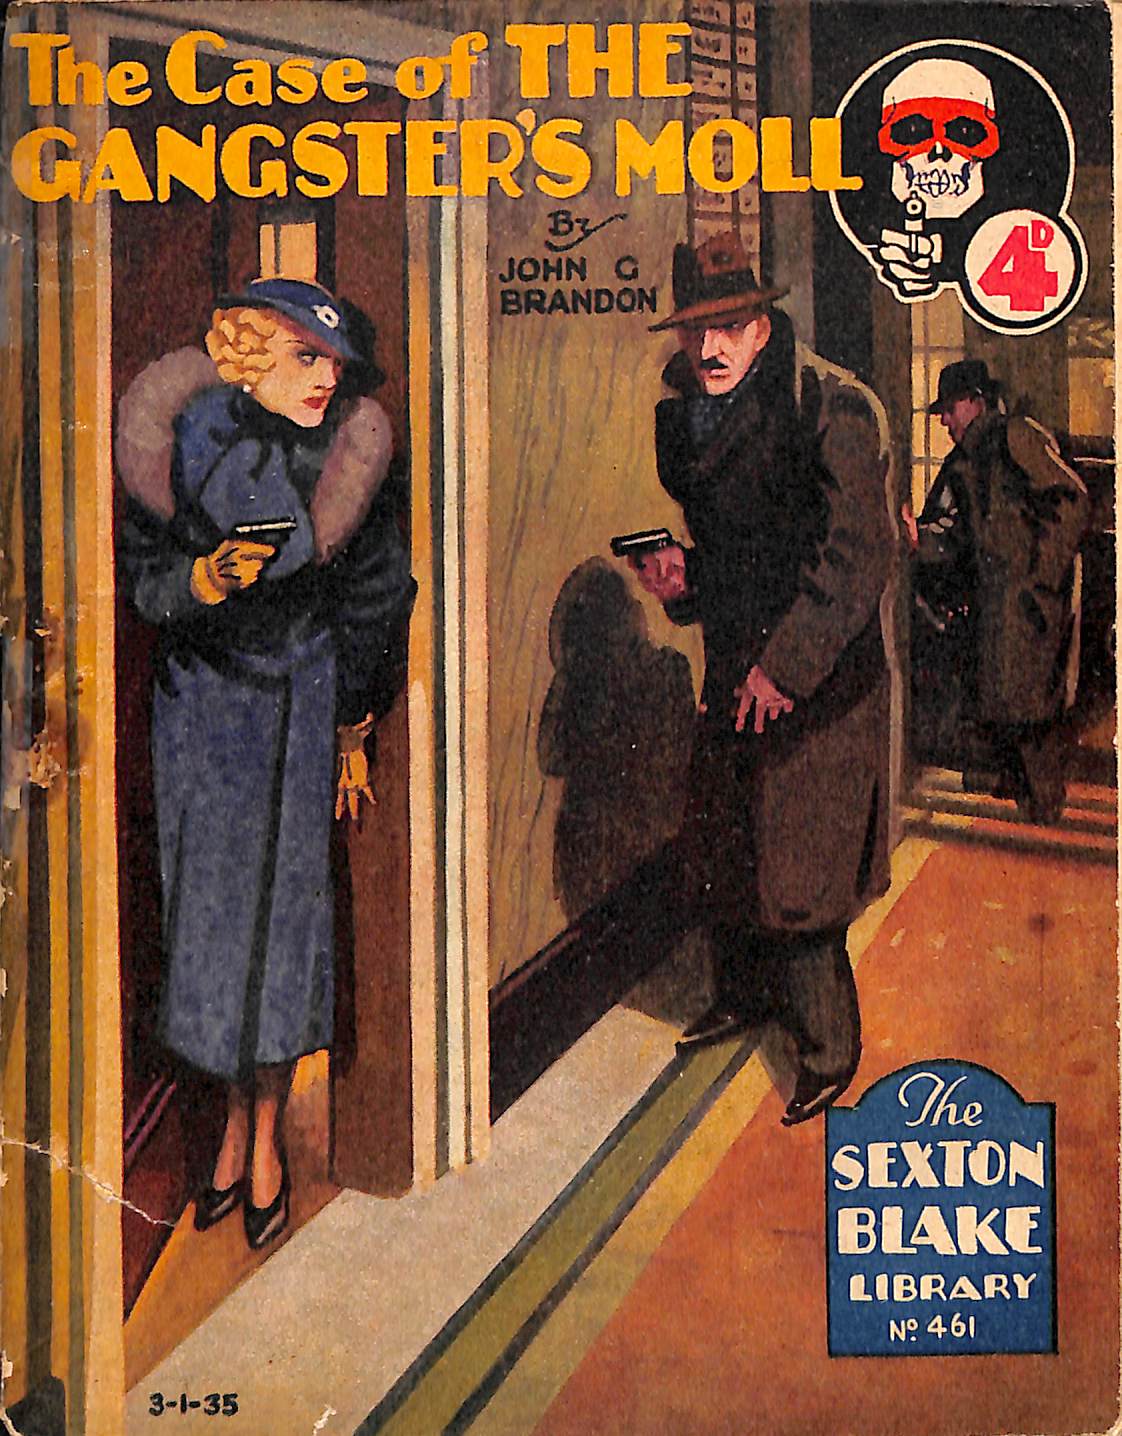 Book Cover For Sexton Blake Library S2 461 - The Case of the Gangster's Moll